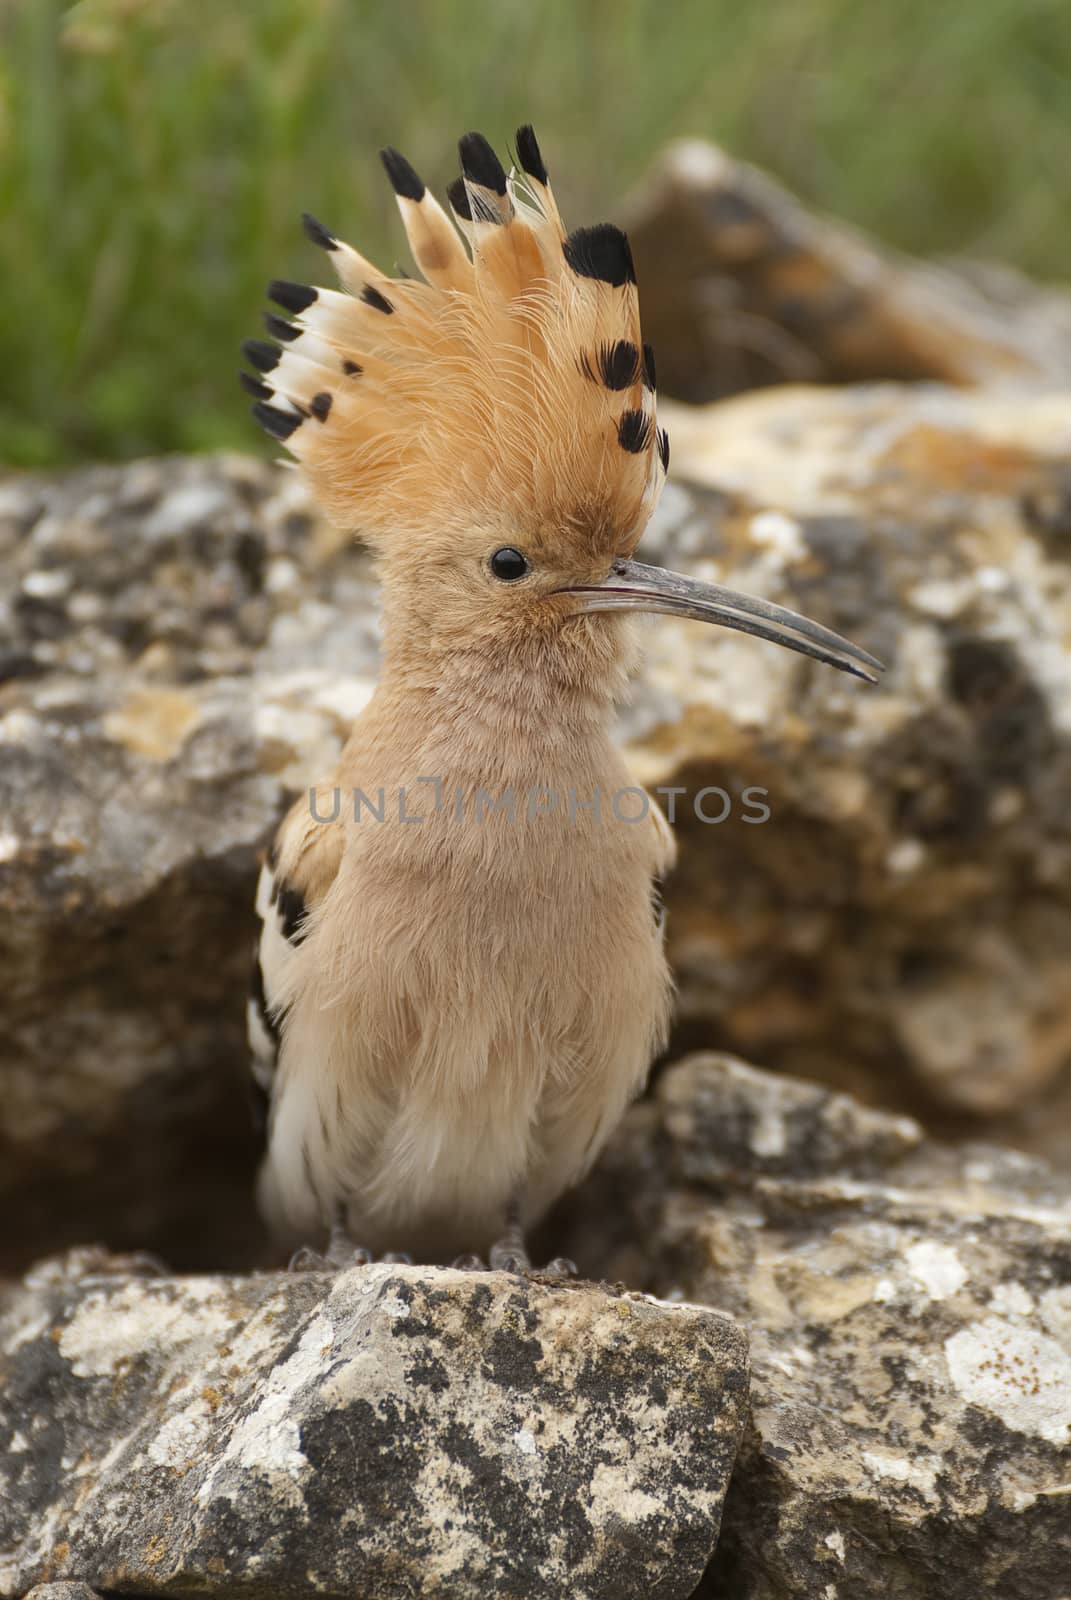 Eurasia Hoopoe or Common Hoopoe (Upupa epops), perched on the ro by jalonsohu@gmail.com